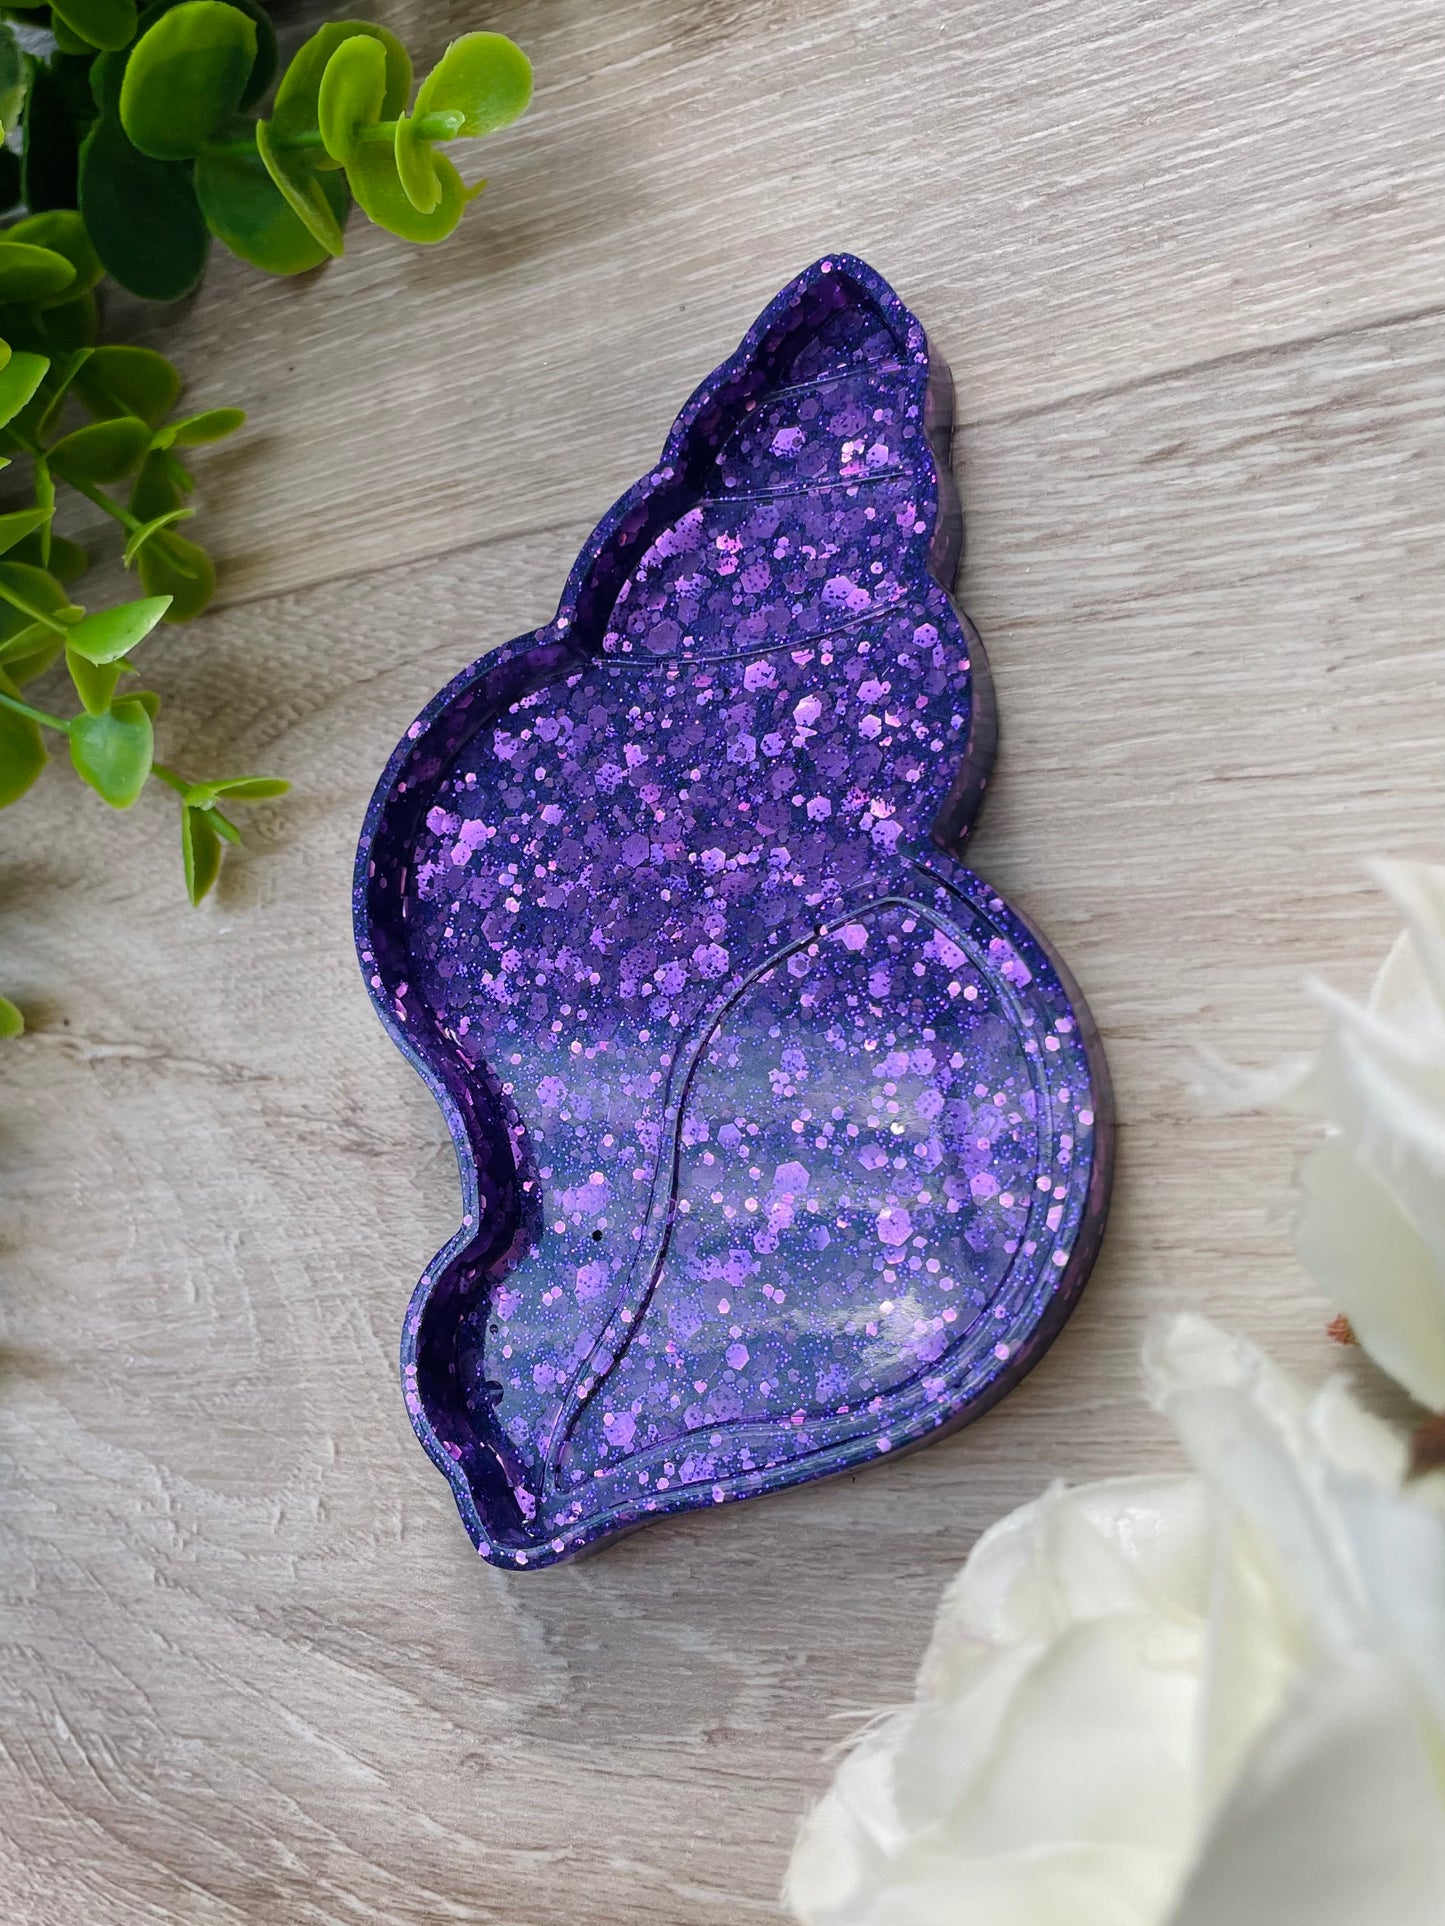 Gorgeous royal purple glittery mini shell dish 🐚🐚  Great compact size, approx 12cm x 7.5cm  x4 Rubber feet included in package as an optional addon